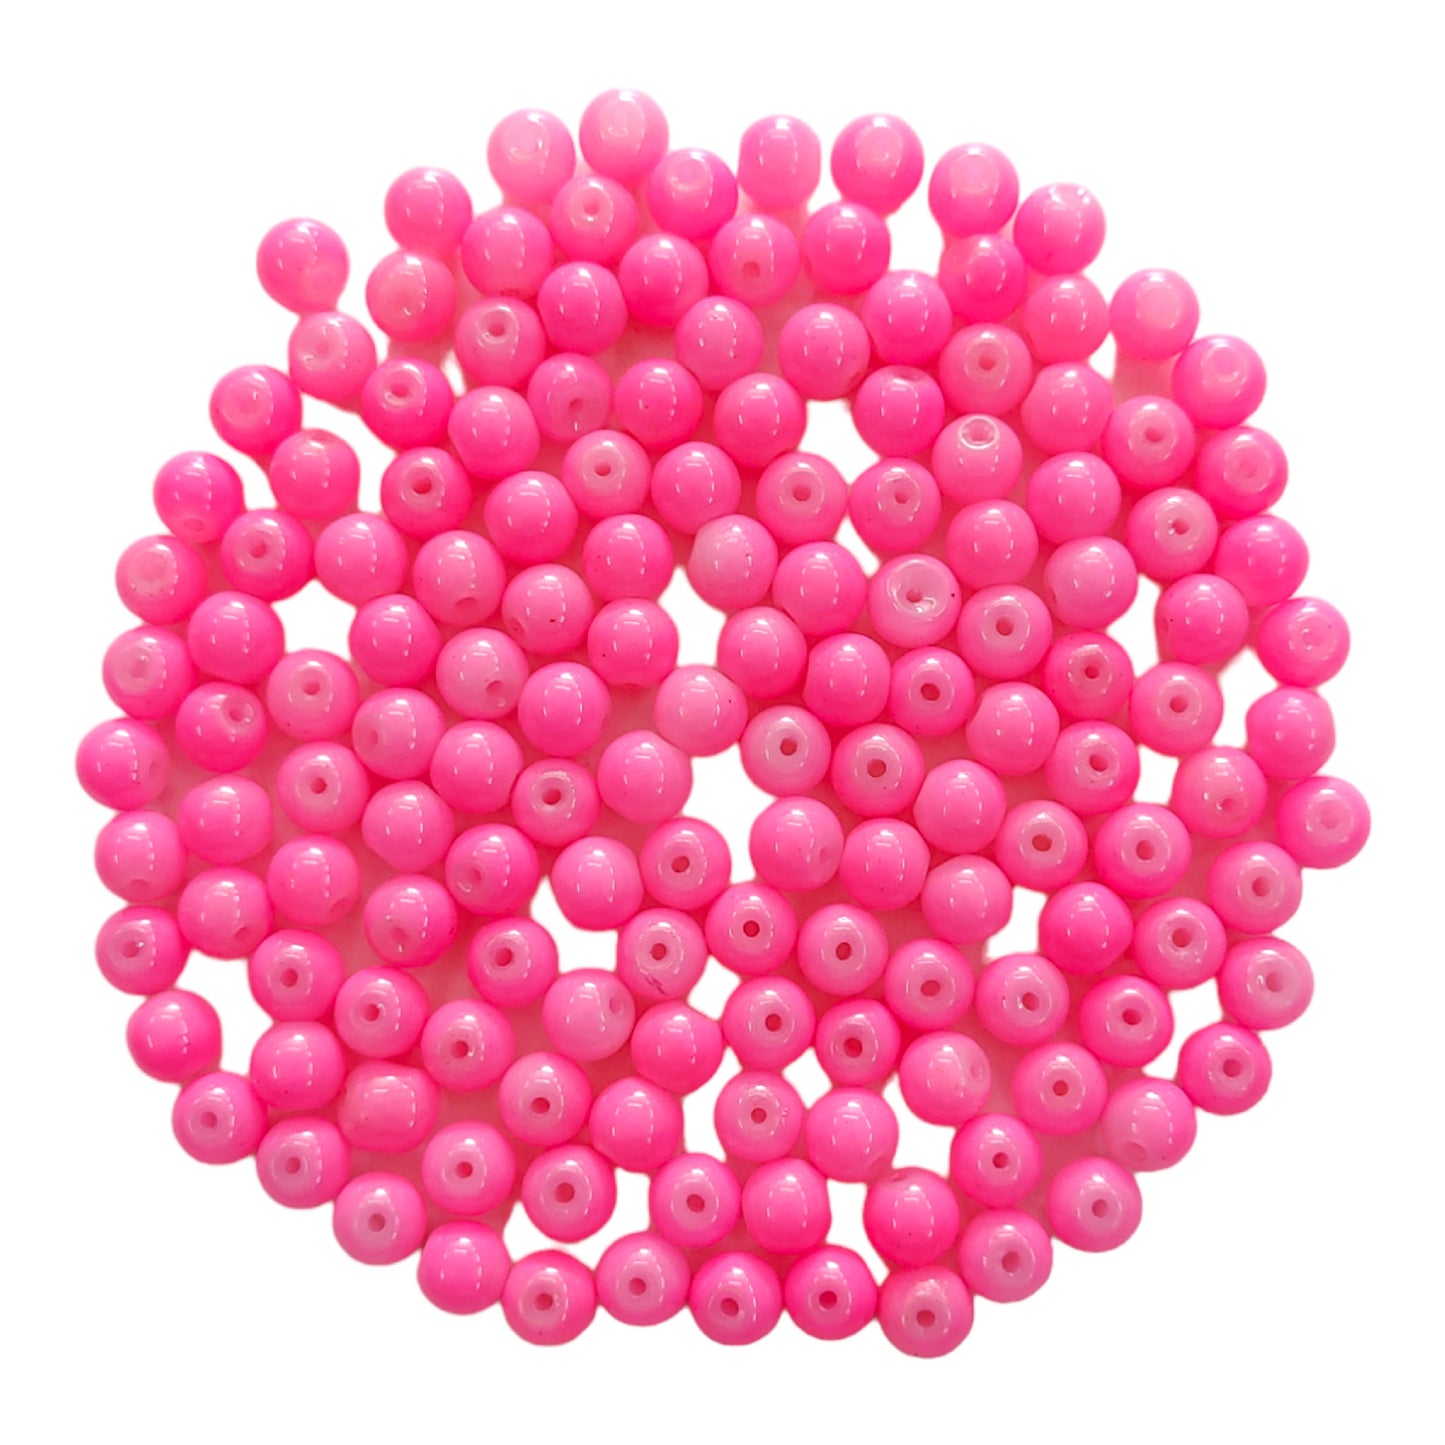 Indian Petals Plain round Glass Color Bead For Craft, Rakhi making or Decoration -11725